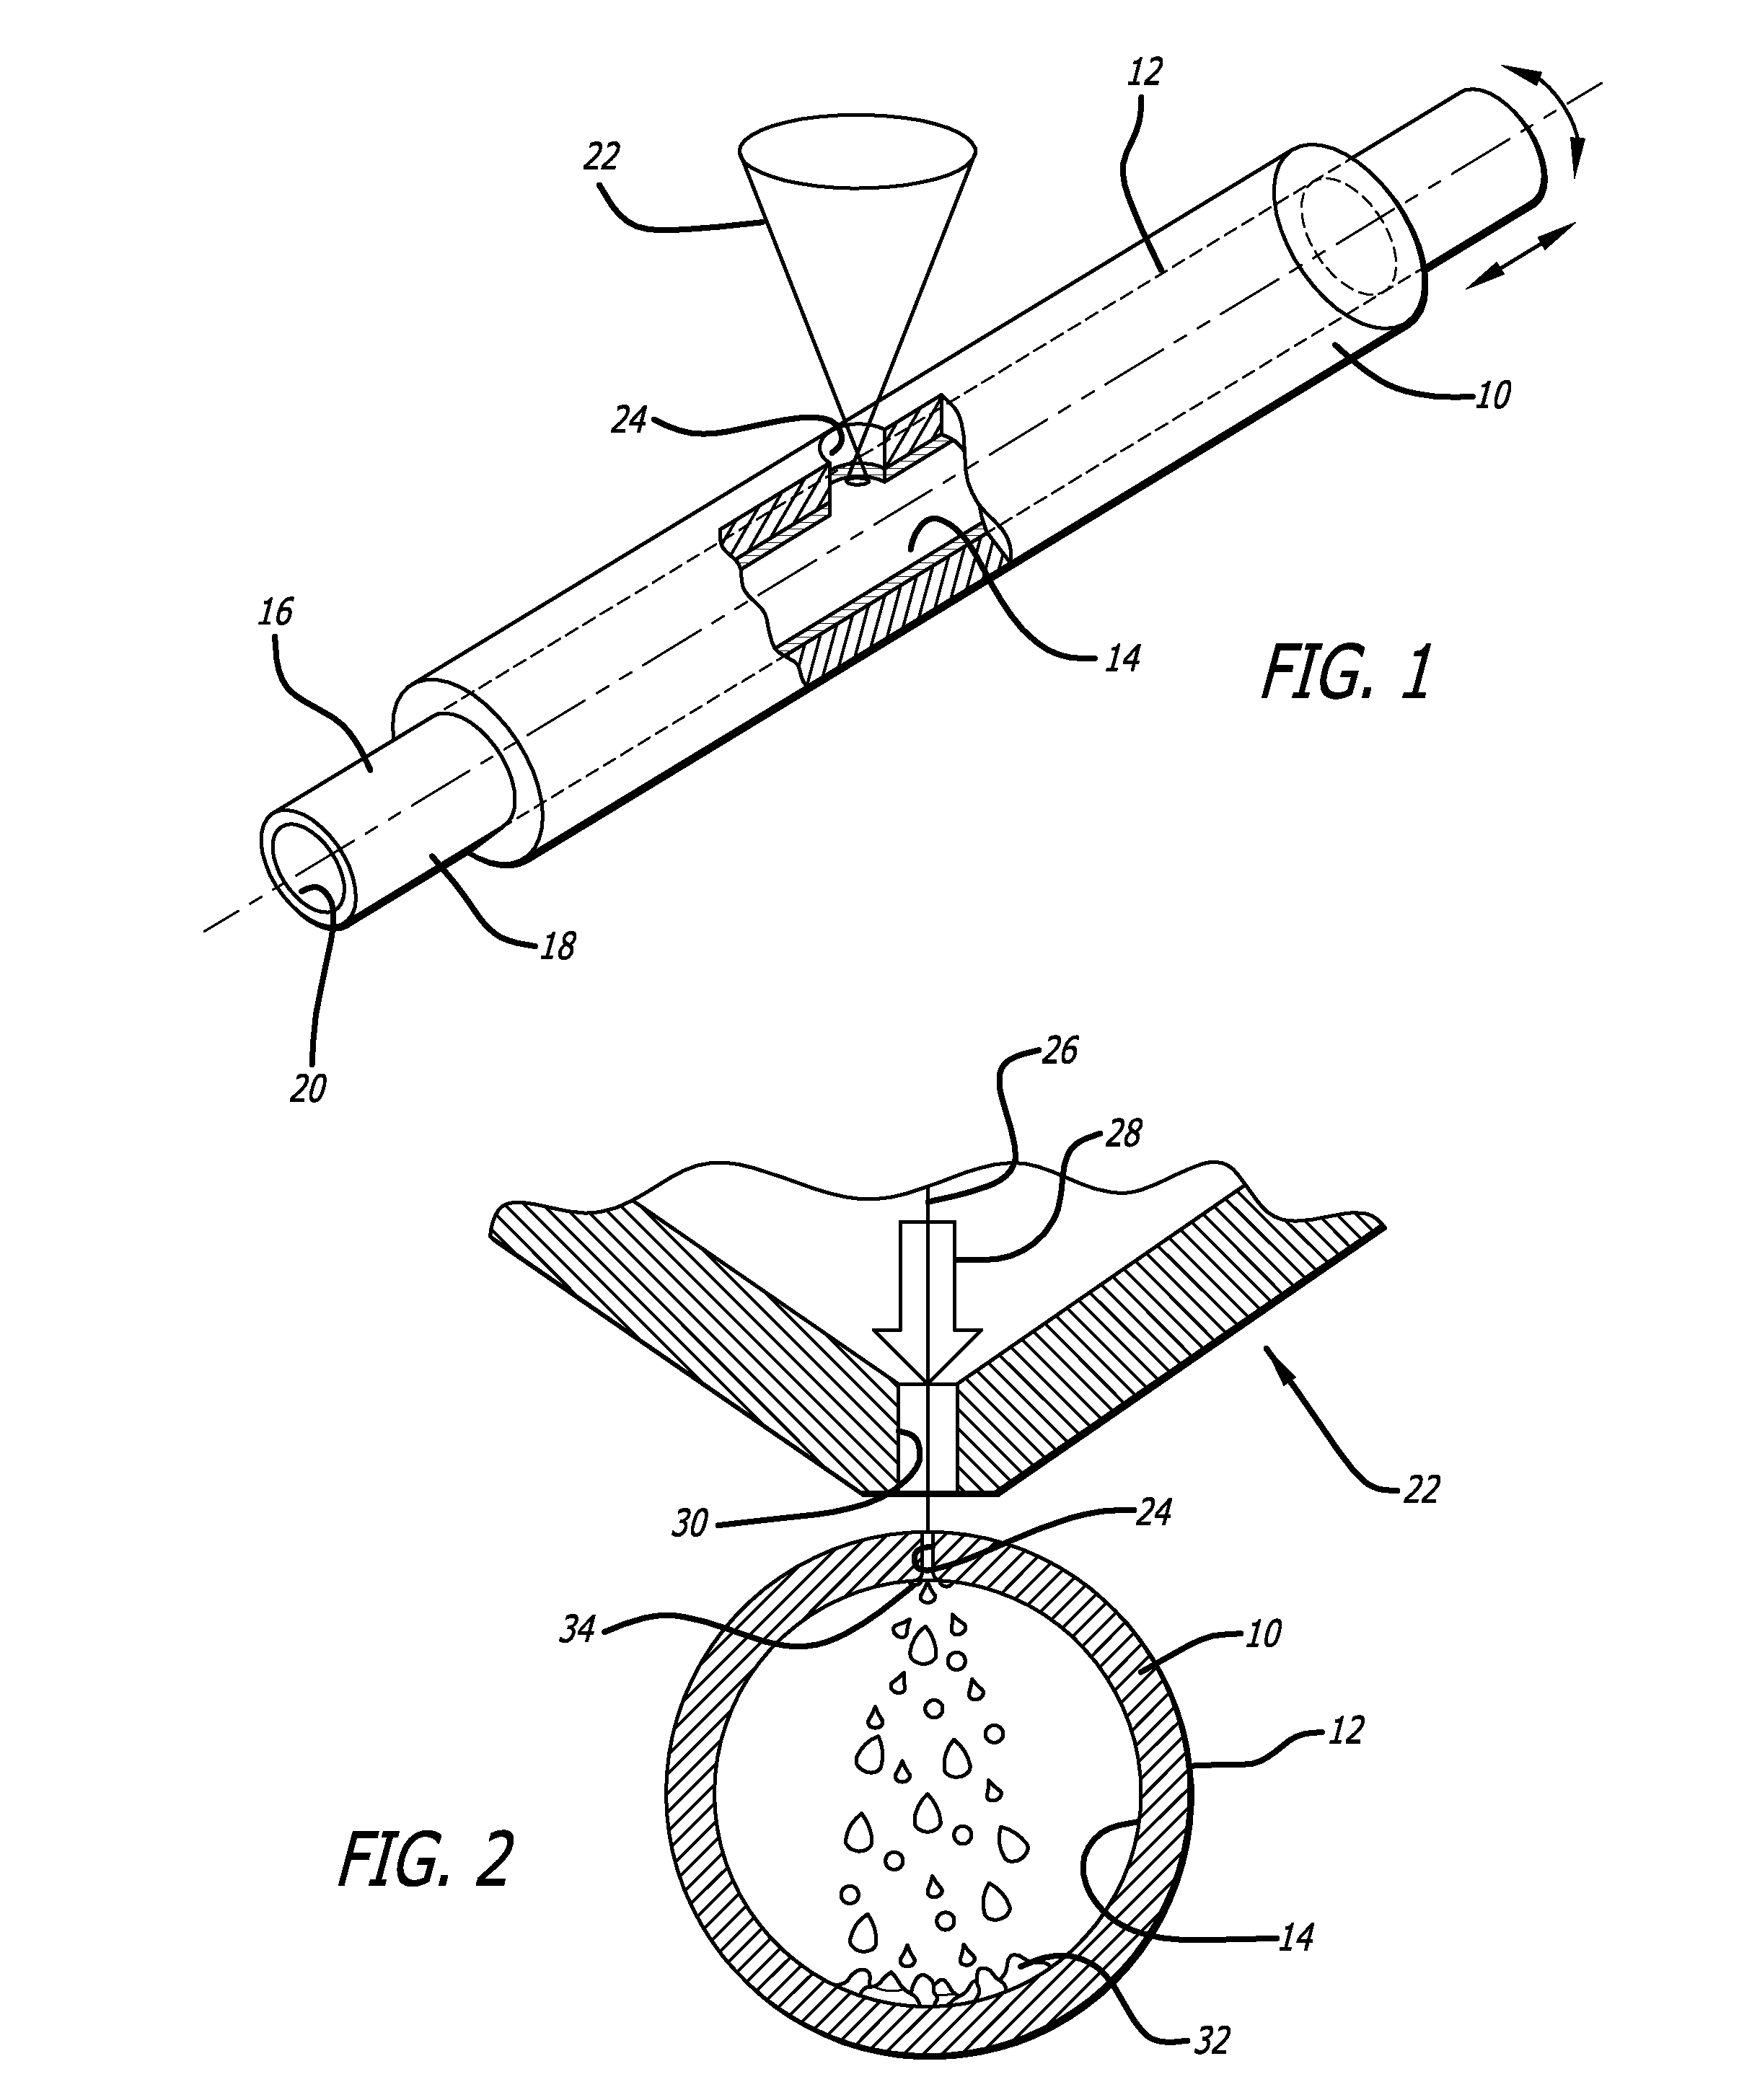 Method for laser cutting tubing using inert gas and a disposable mask